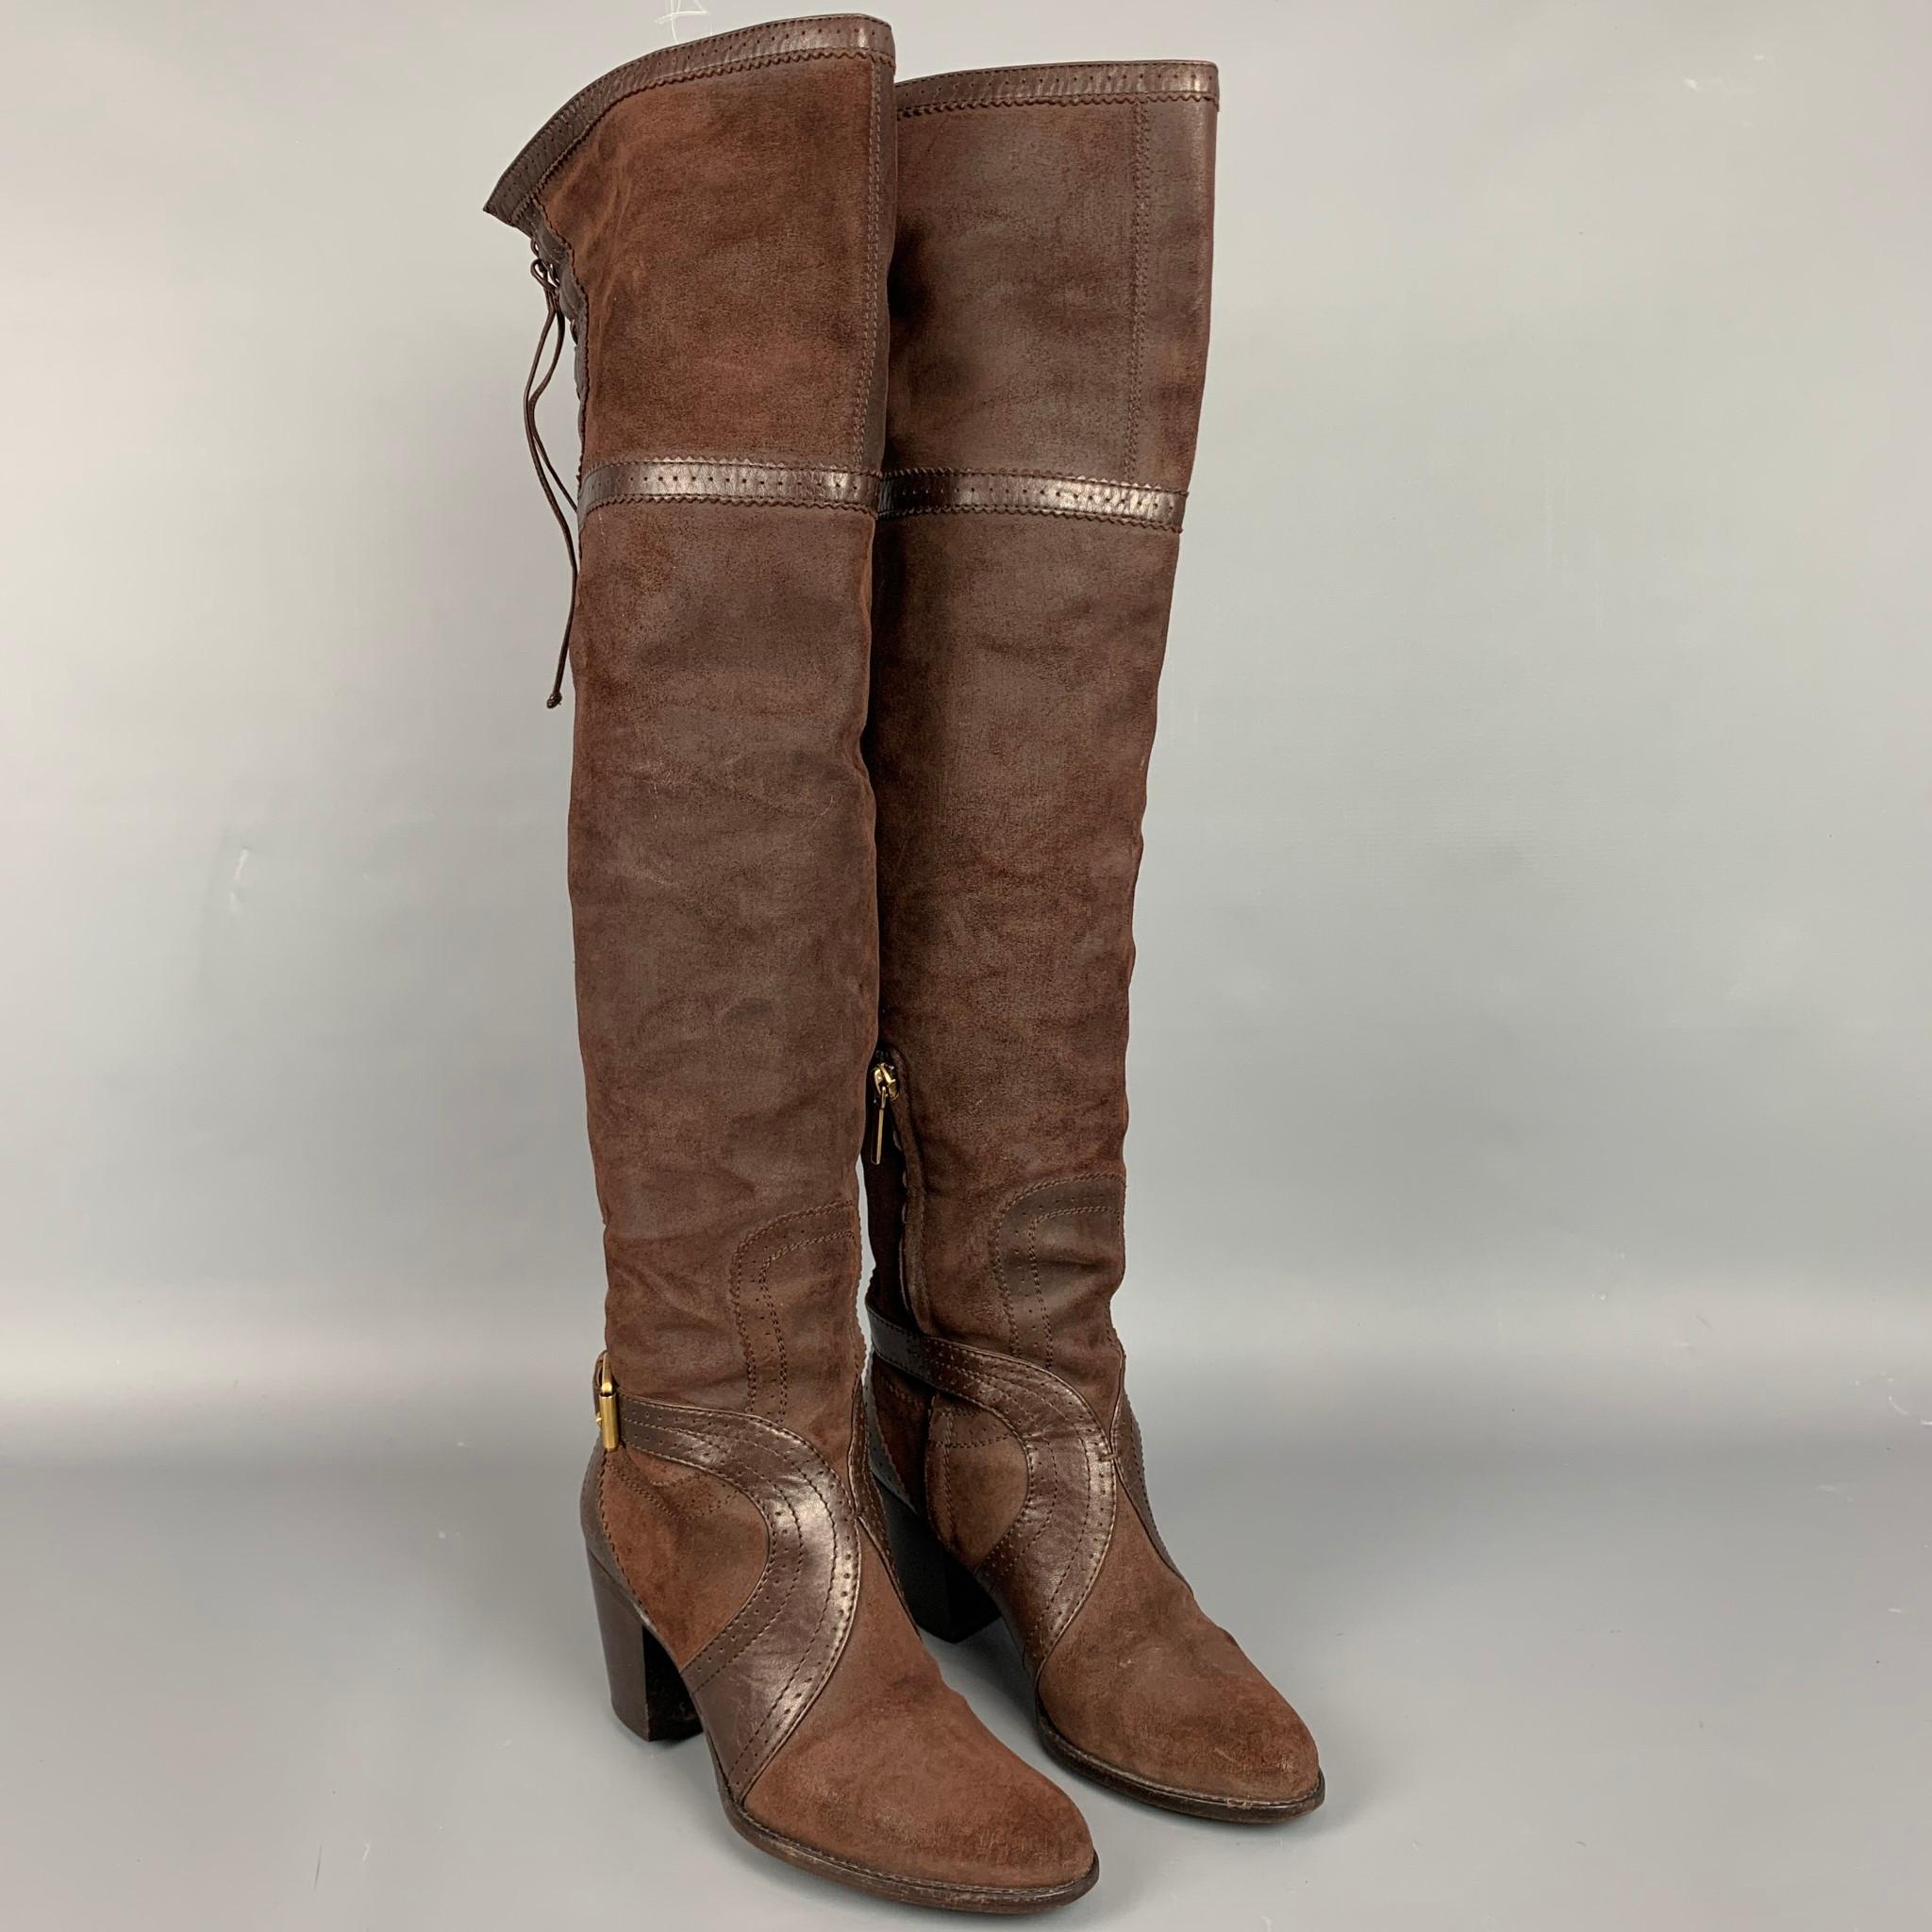 DIOR boots comes in a brown suede with a leather trim featuring a pirate style, buckle strap closure, and a chucky heel. Made in Italy.

Good Pre-Owned Condition.
Marked: IT 36

Measurements:

Length: 8.5 in.
Width: 3 in.
Height: 21 in. 